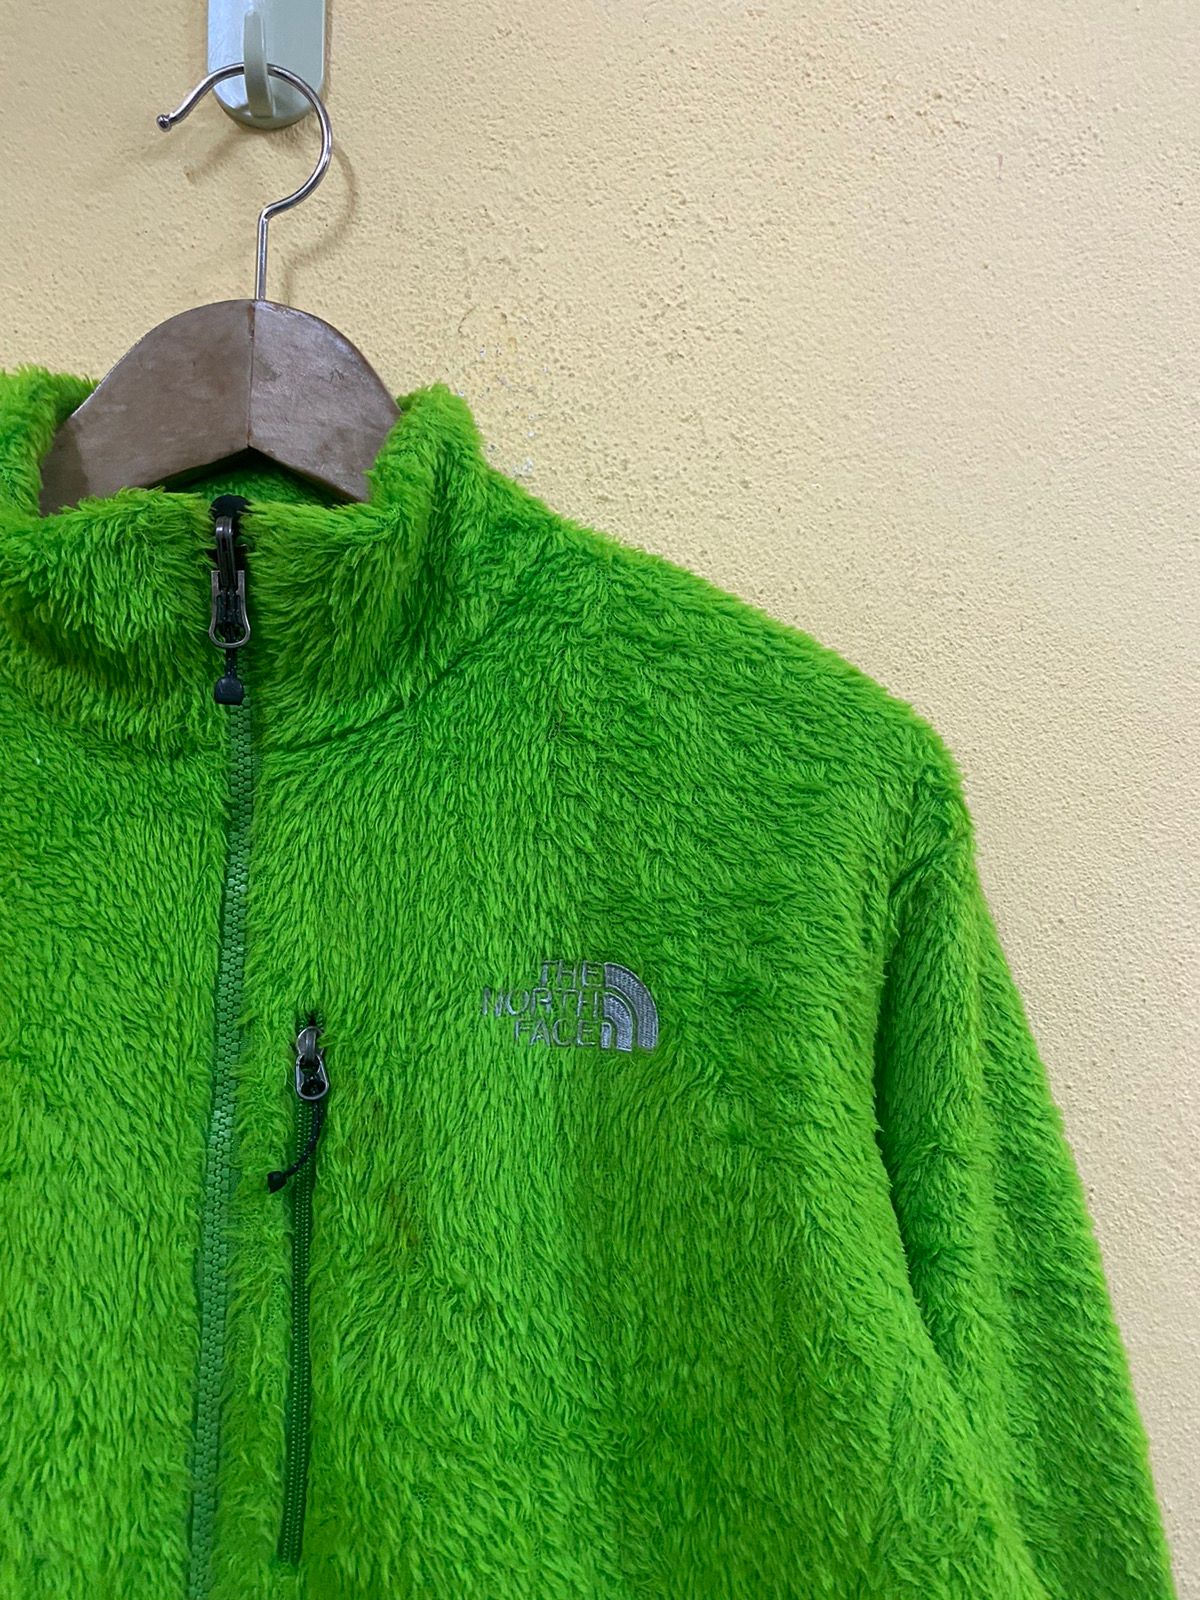 Outdoor Style Go Out! THE NORTH FACE STYLE SHERPA JACKET FULL ZIPPED Size US L / EU 52-54 / 3 - 2 Preview